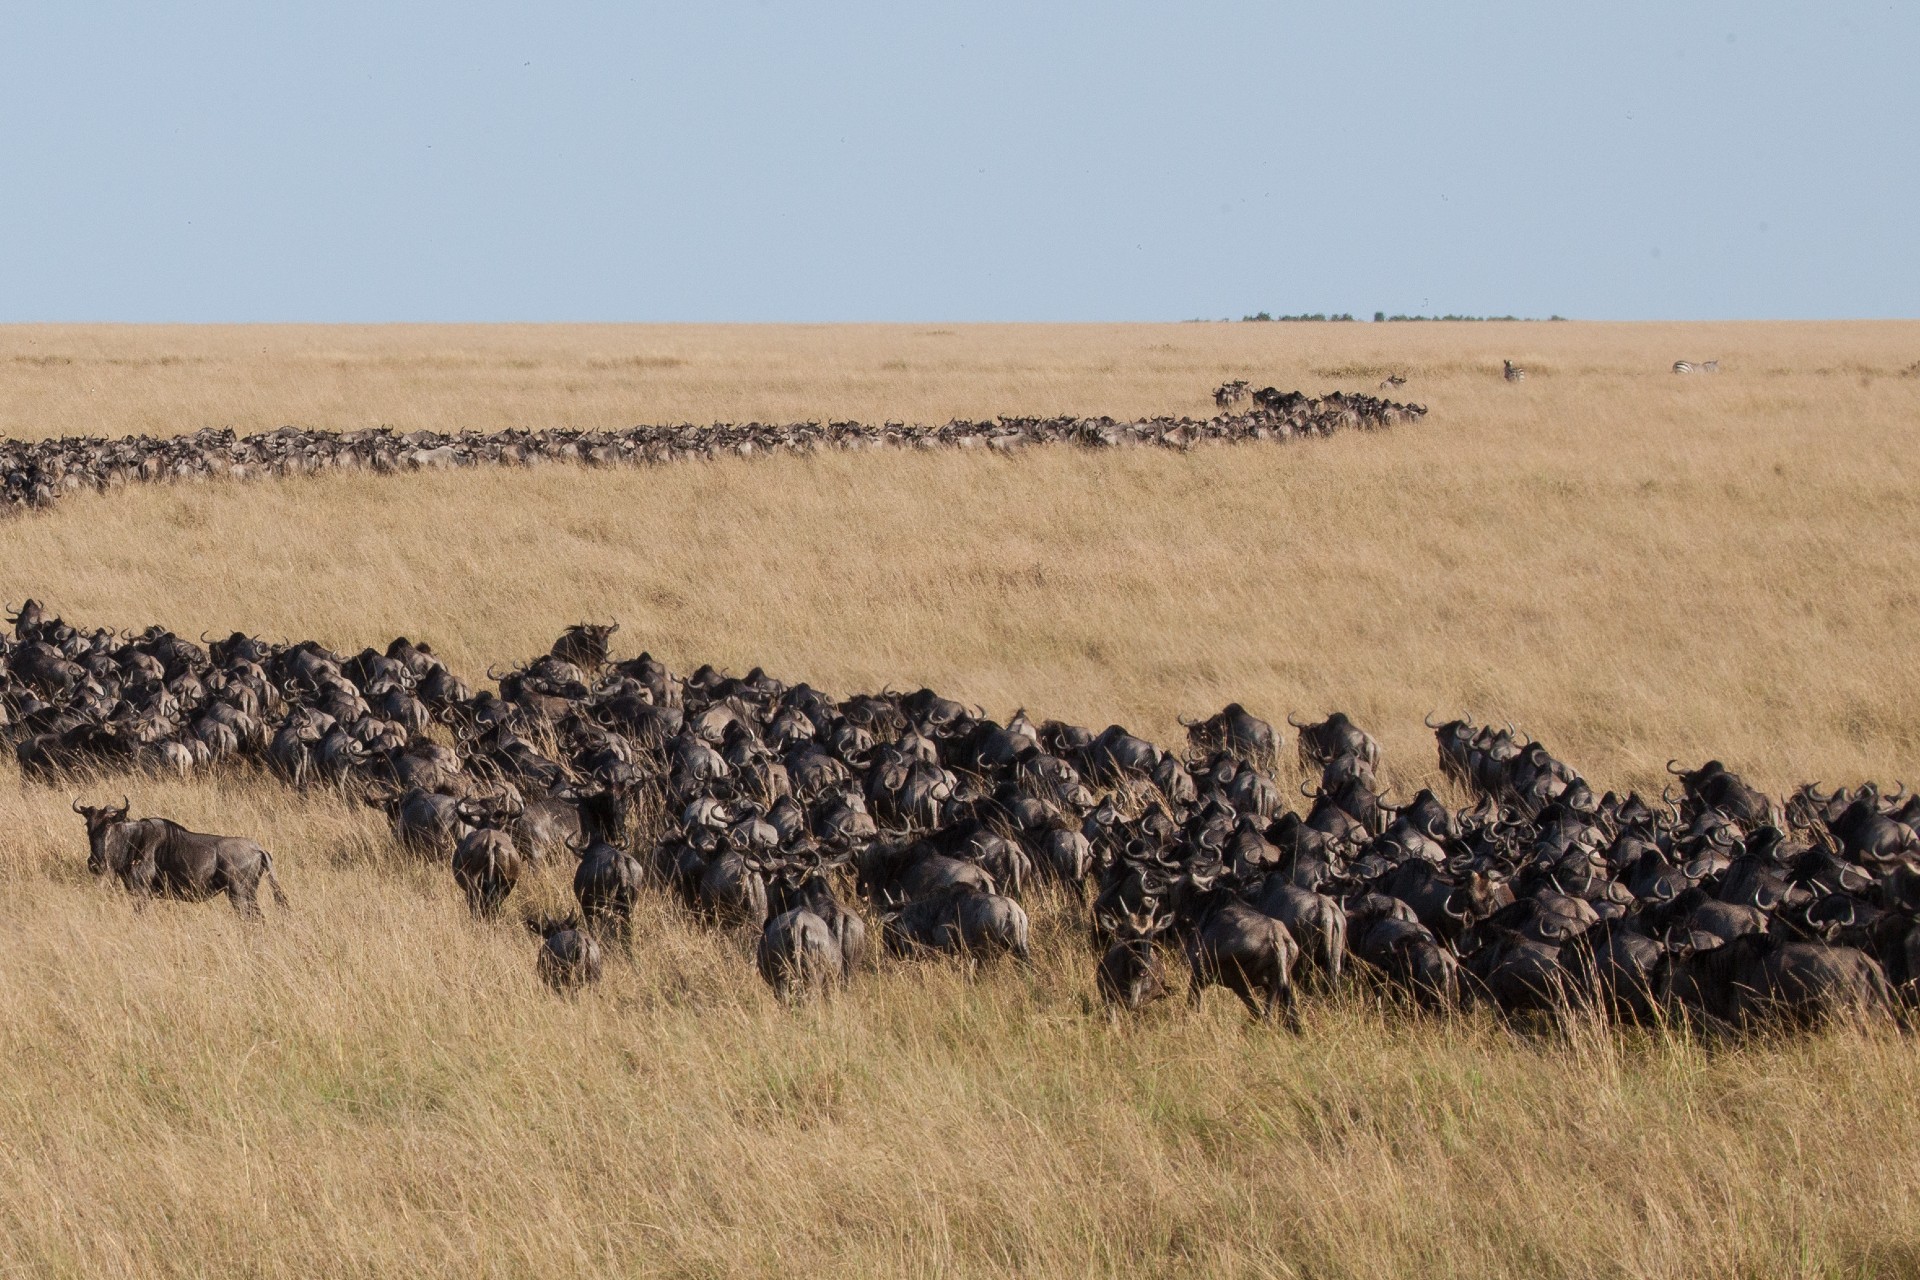 A migration of Wildebeest in Serengeti National Park,Tanzania